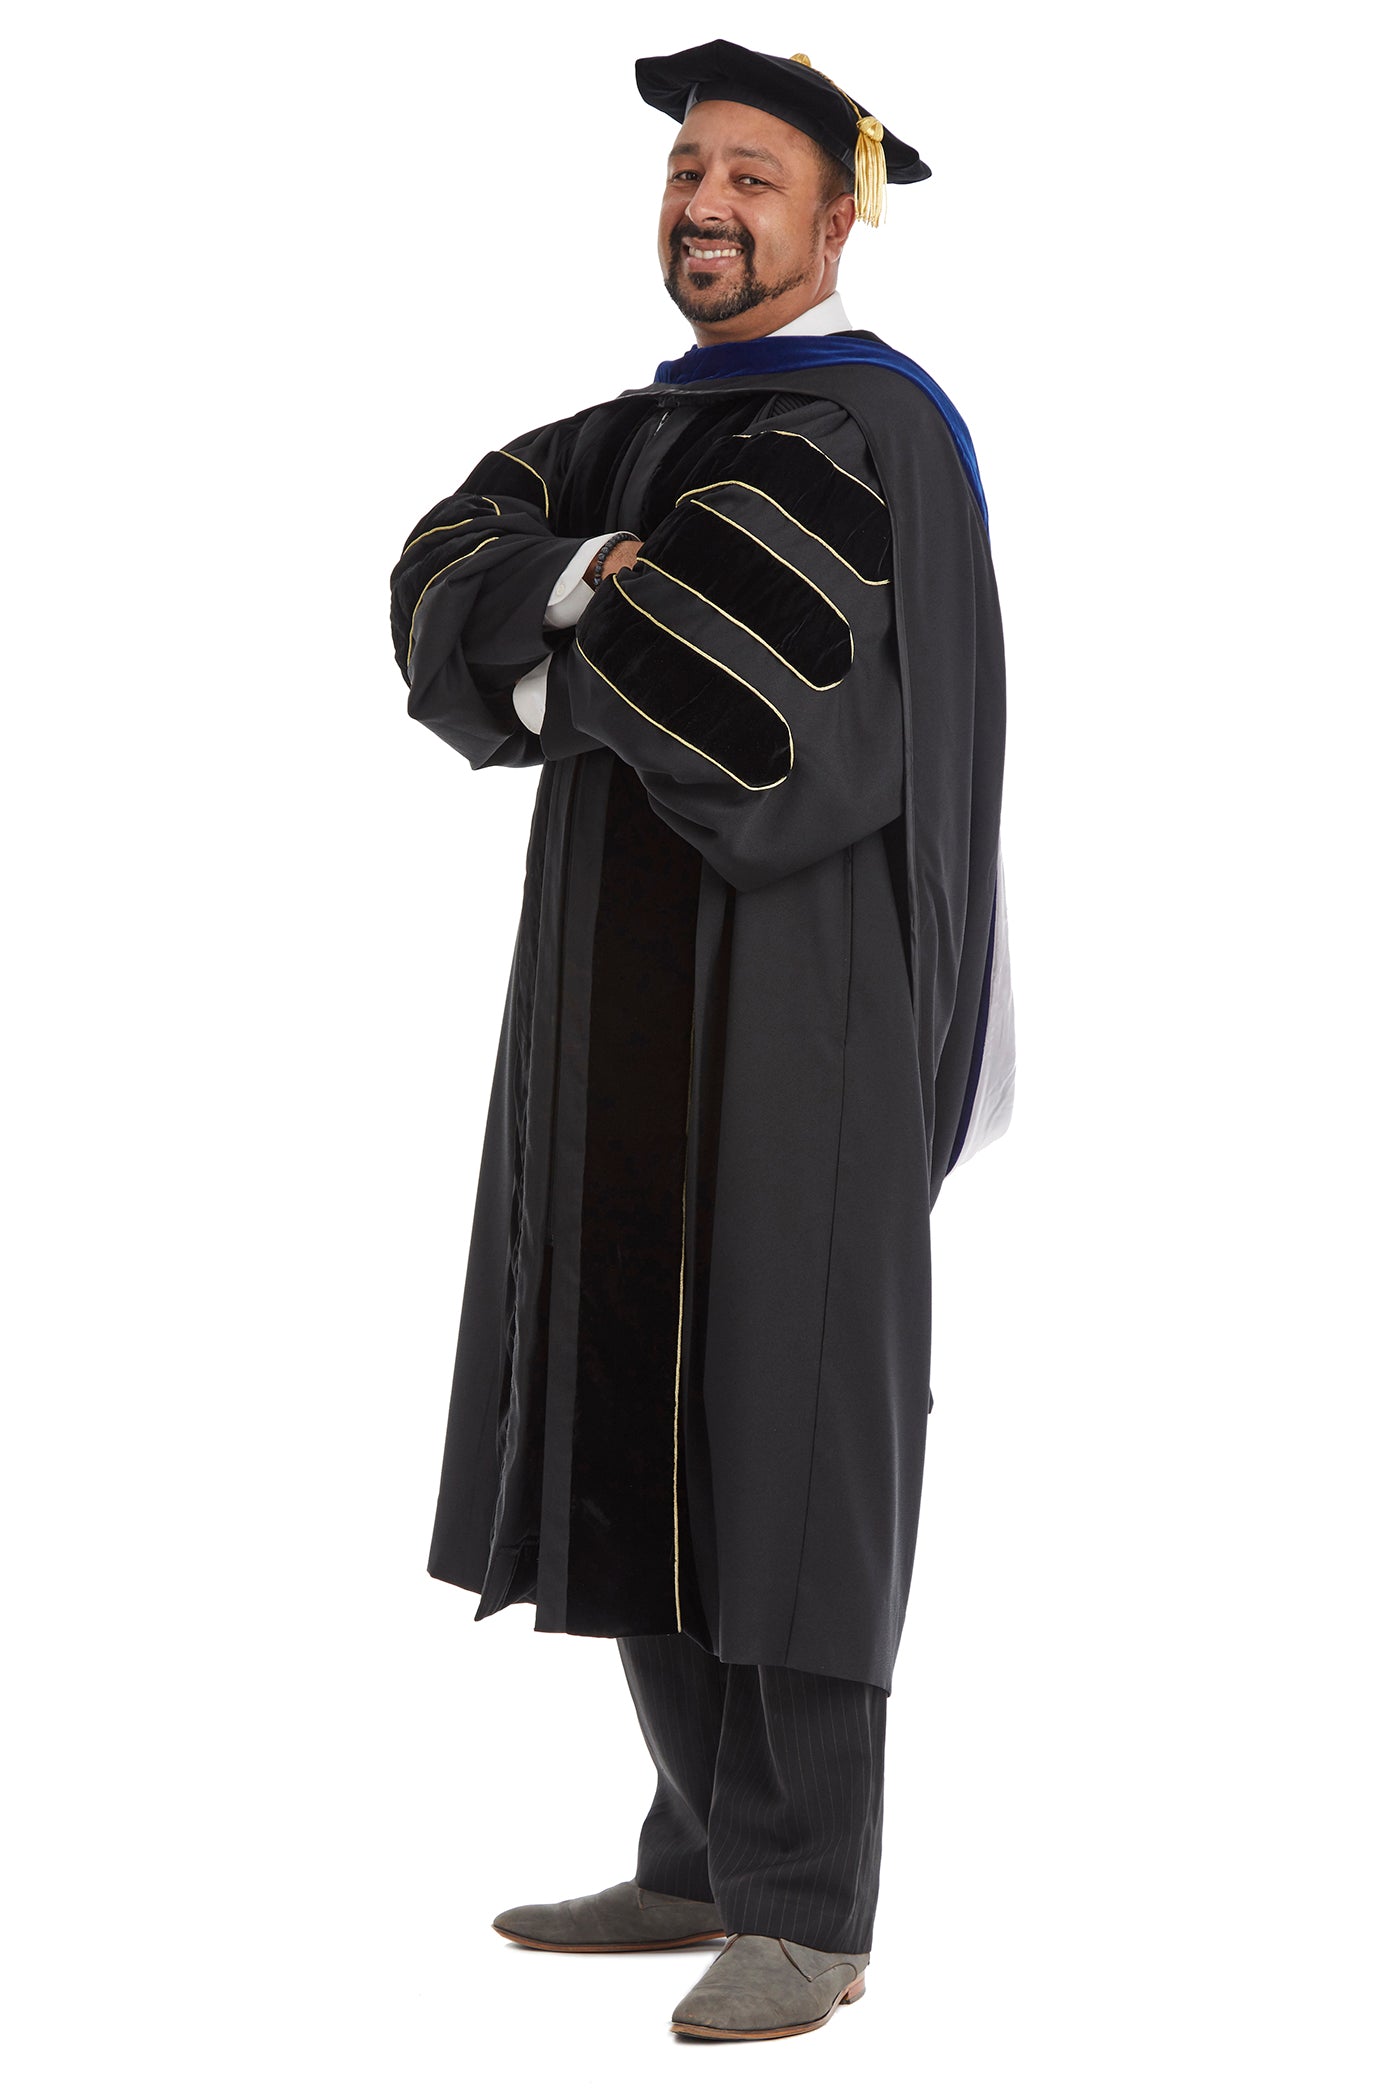 Complete Doctoral Regalia for US Military Academy at West Point